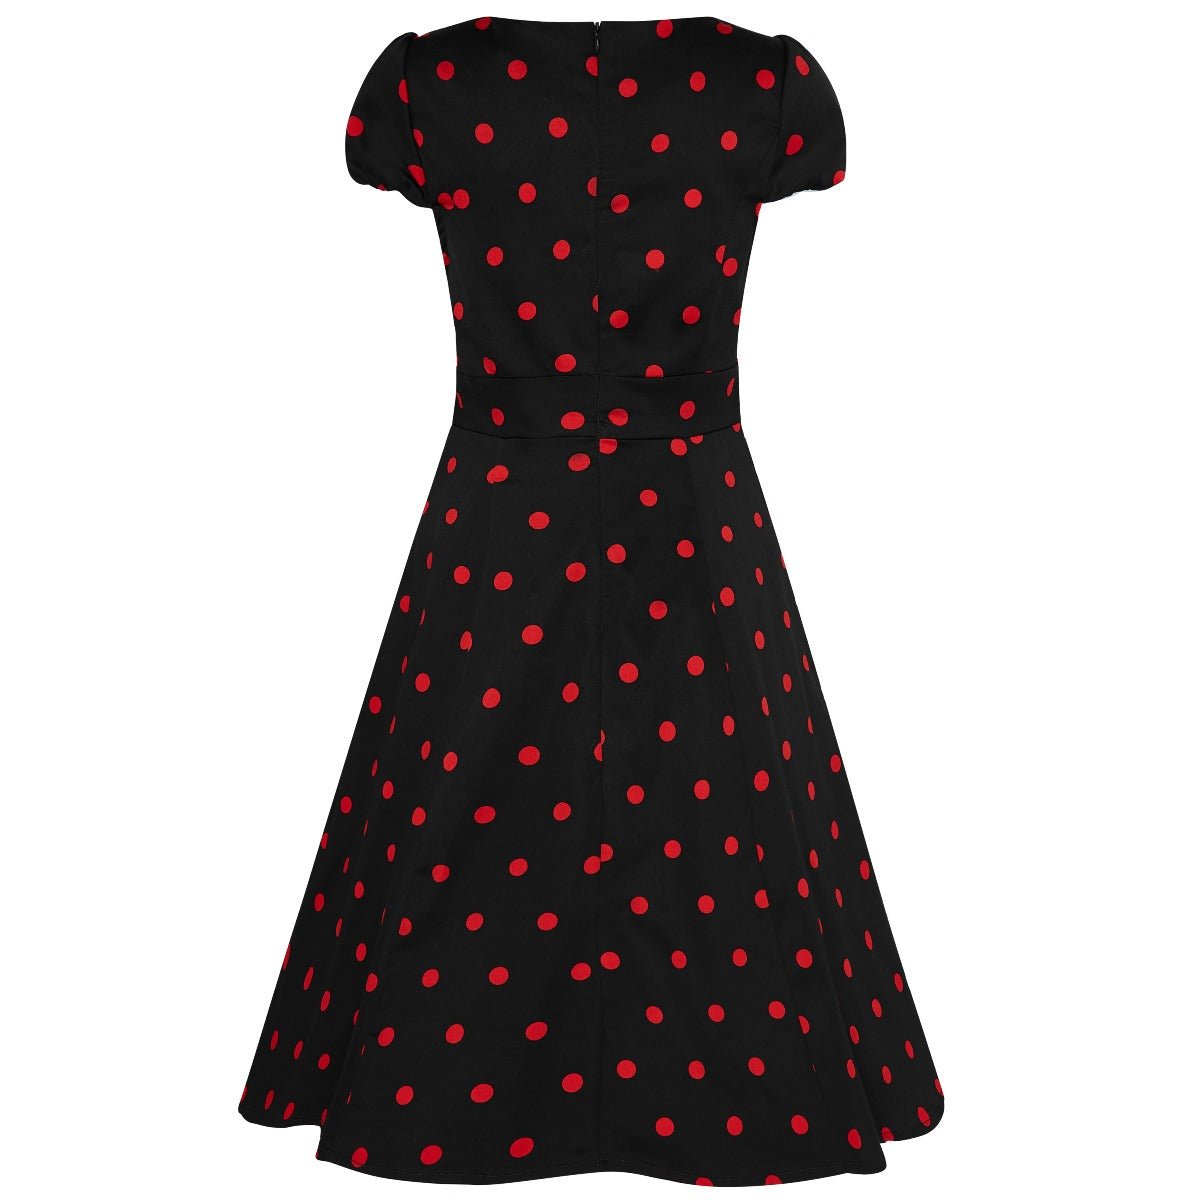 Claudia cap sleeve dress in black, with red polka dots, back view